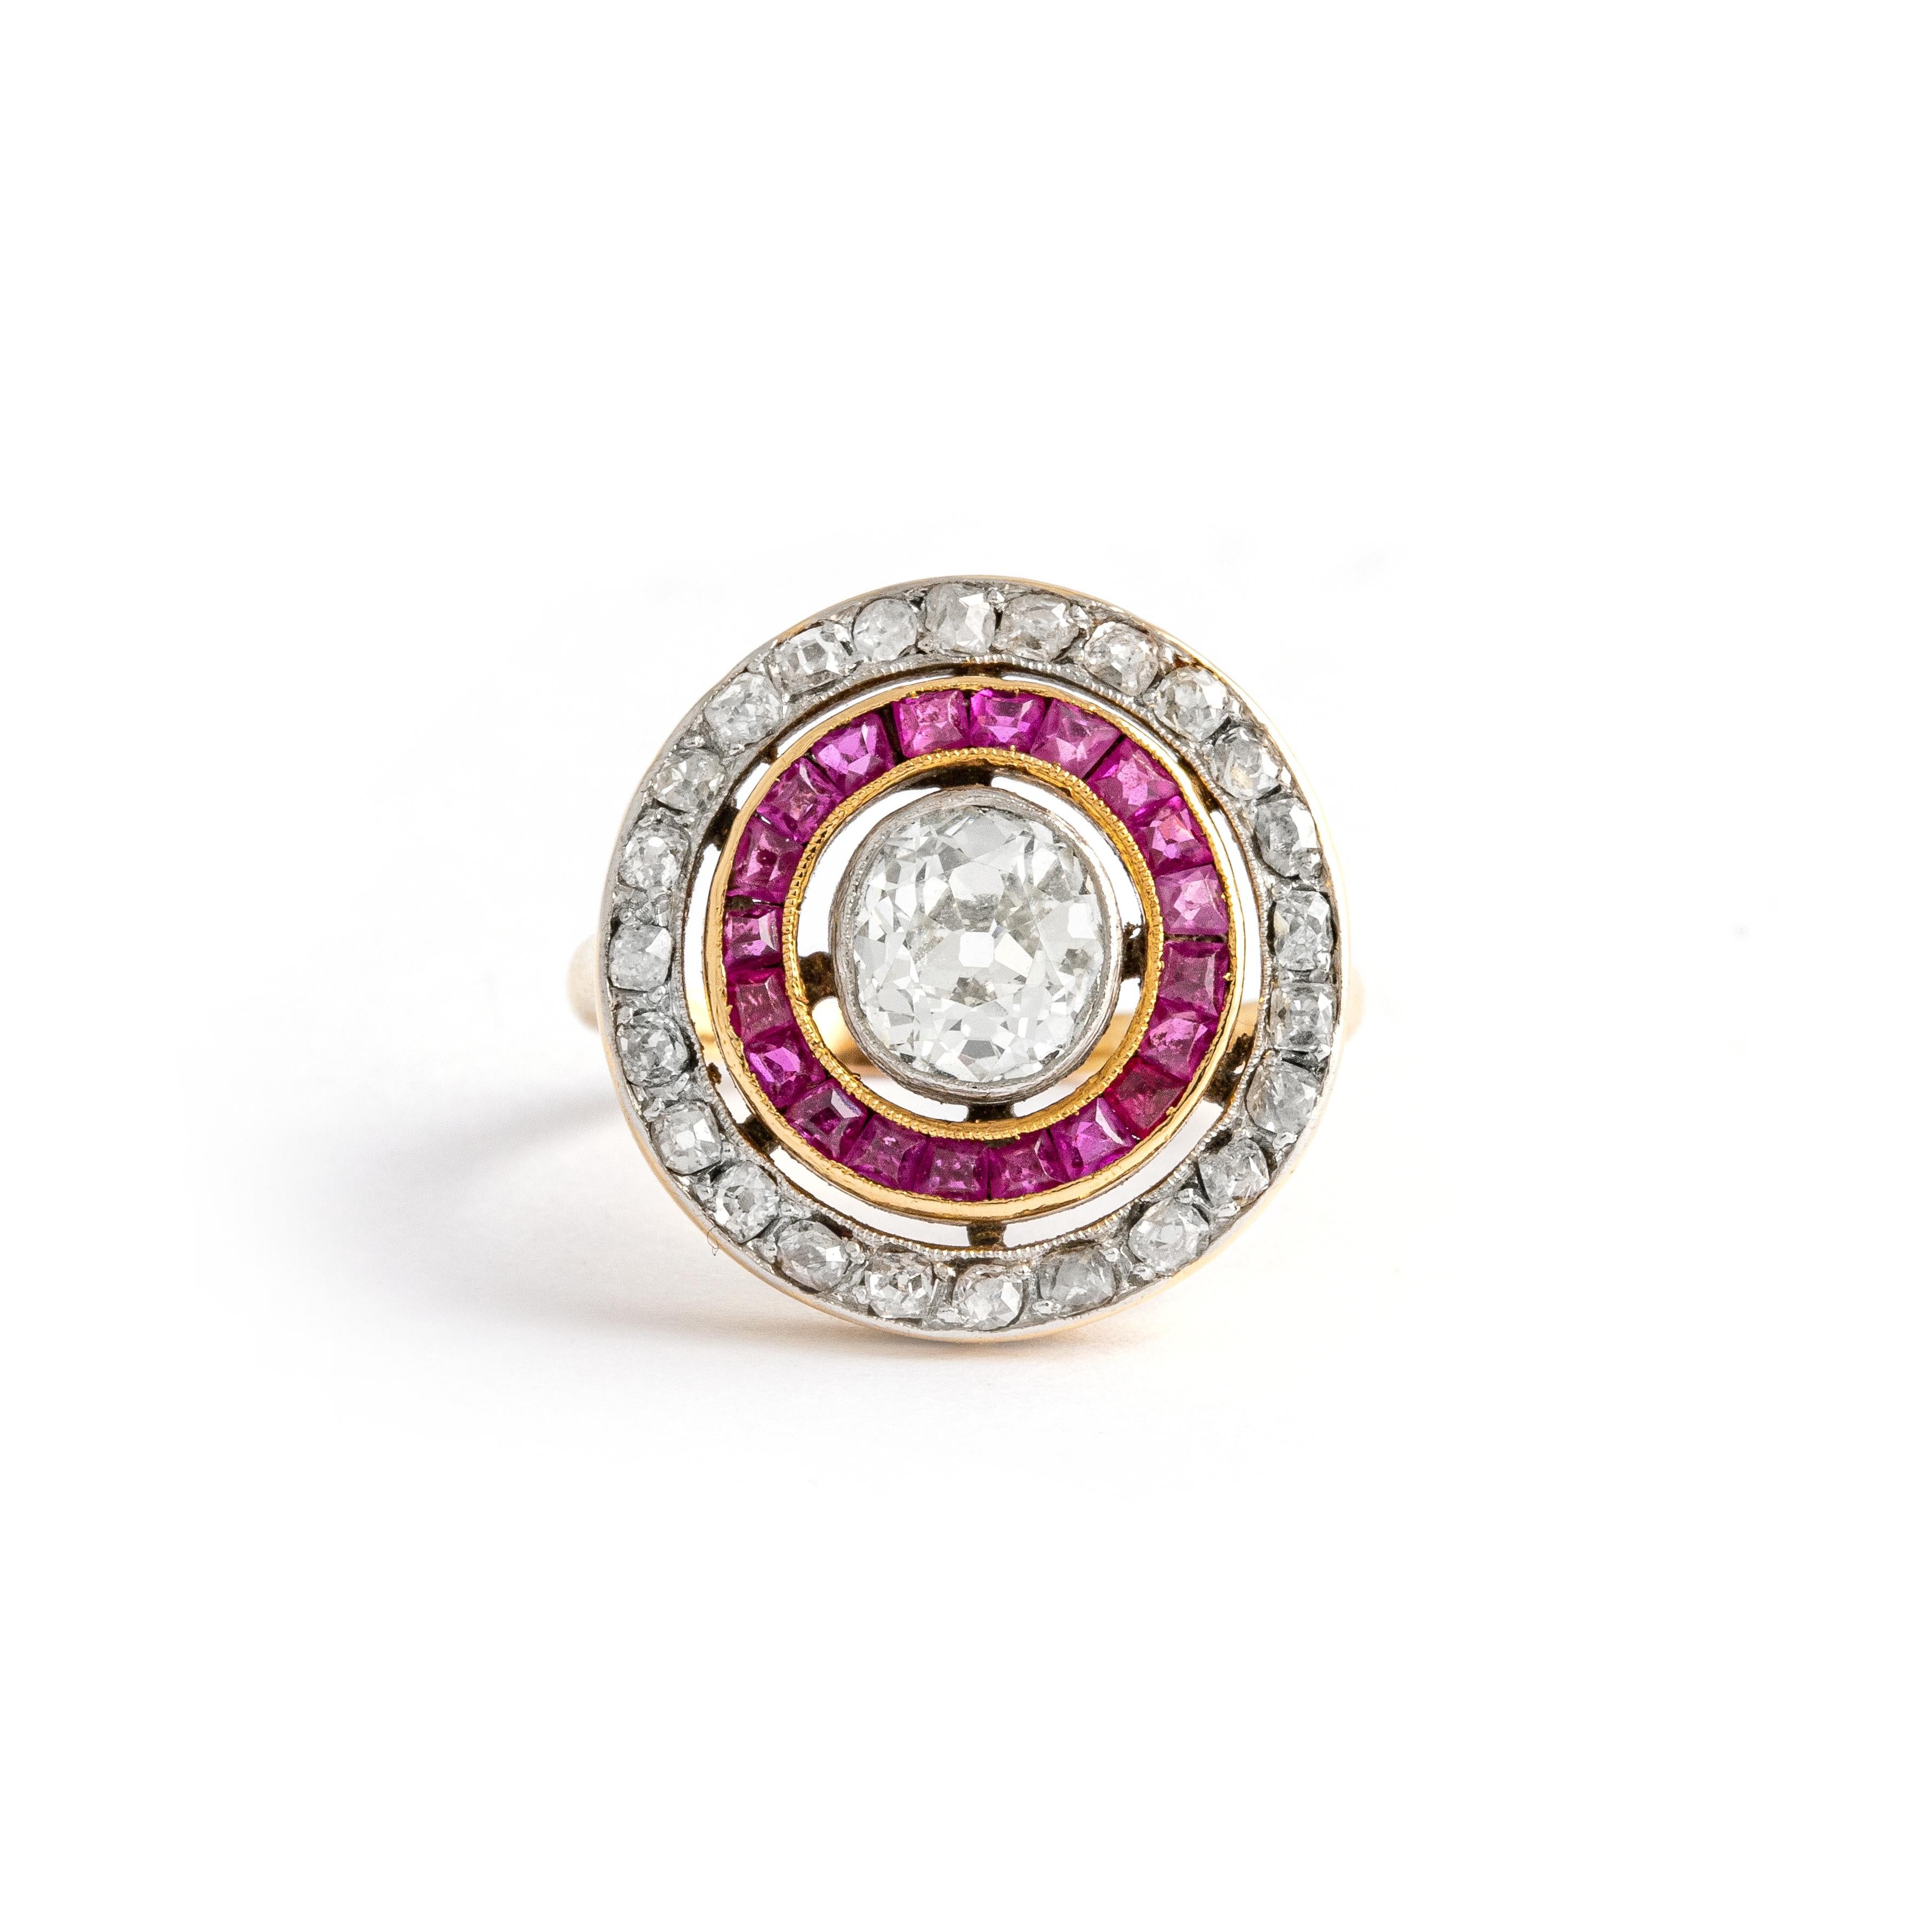 Antique Diamond and Ruby Gold Ring.
Ring Size: 6 
Total weight: 4.87 grams.